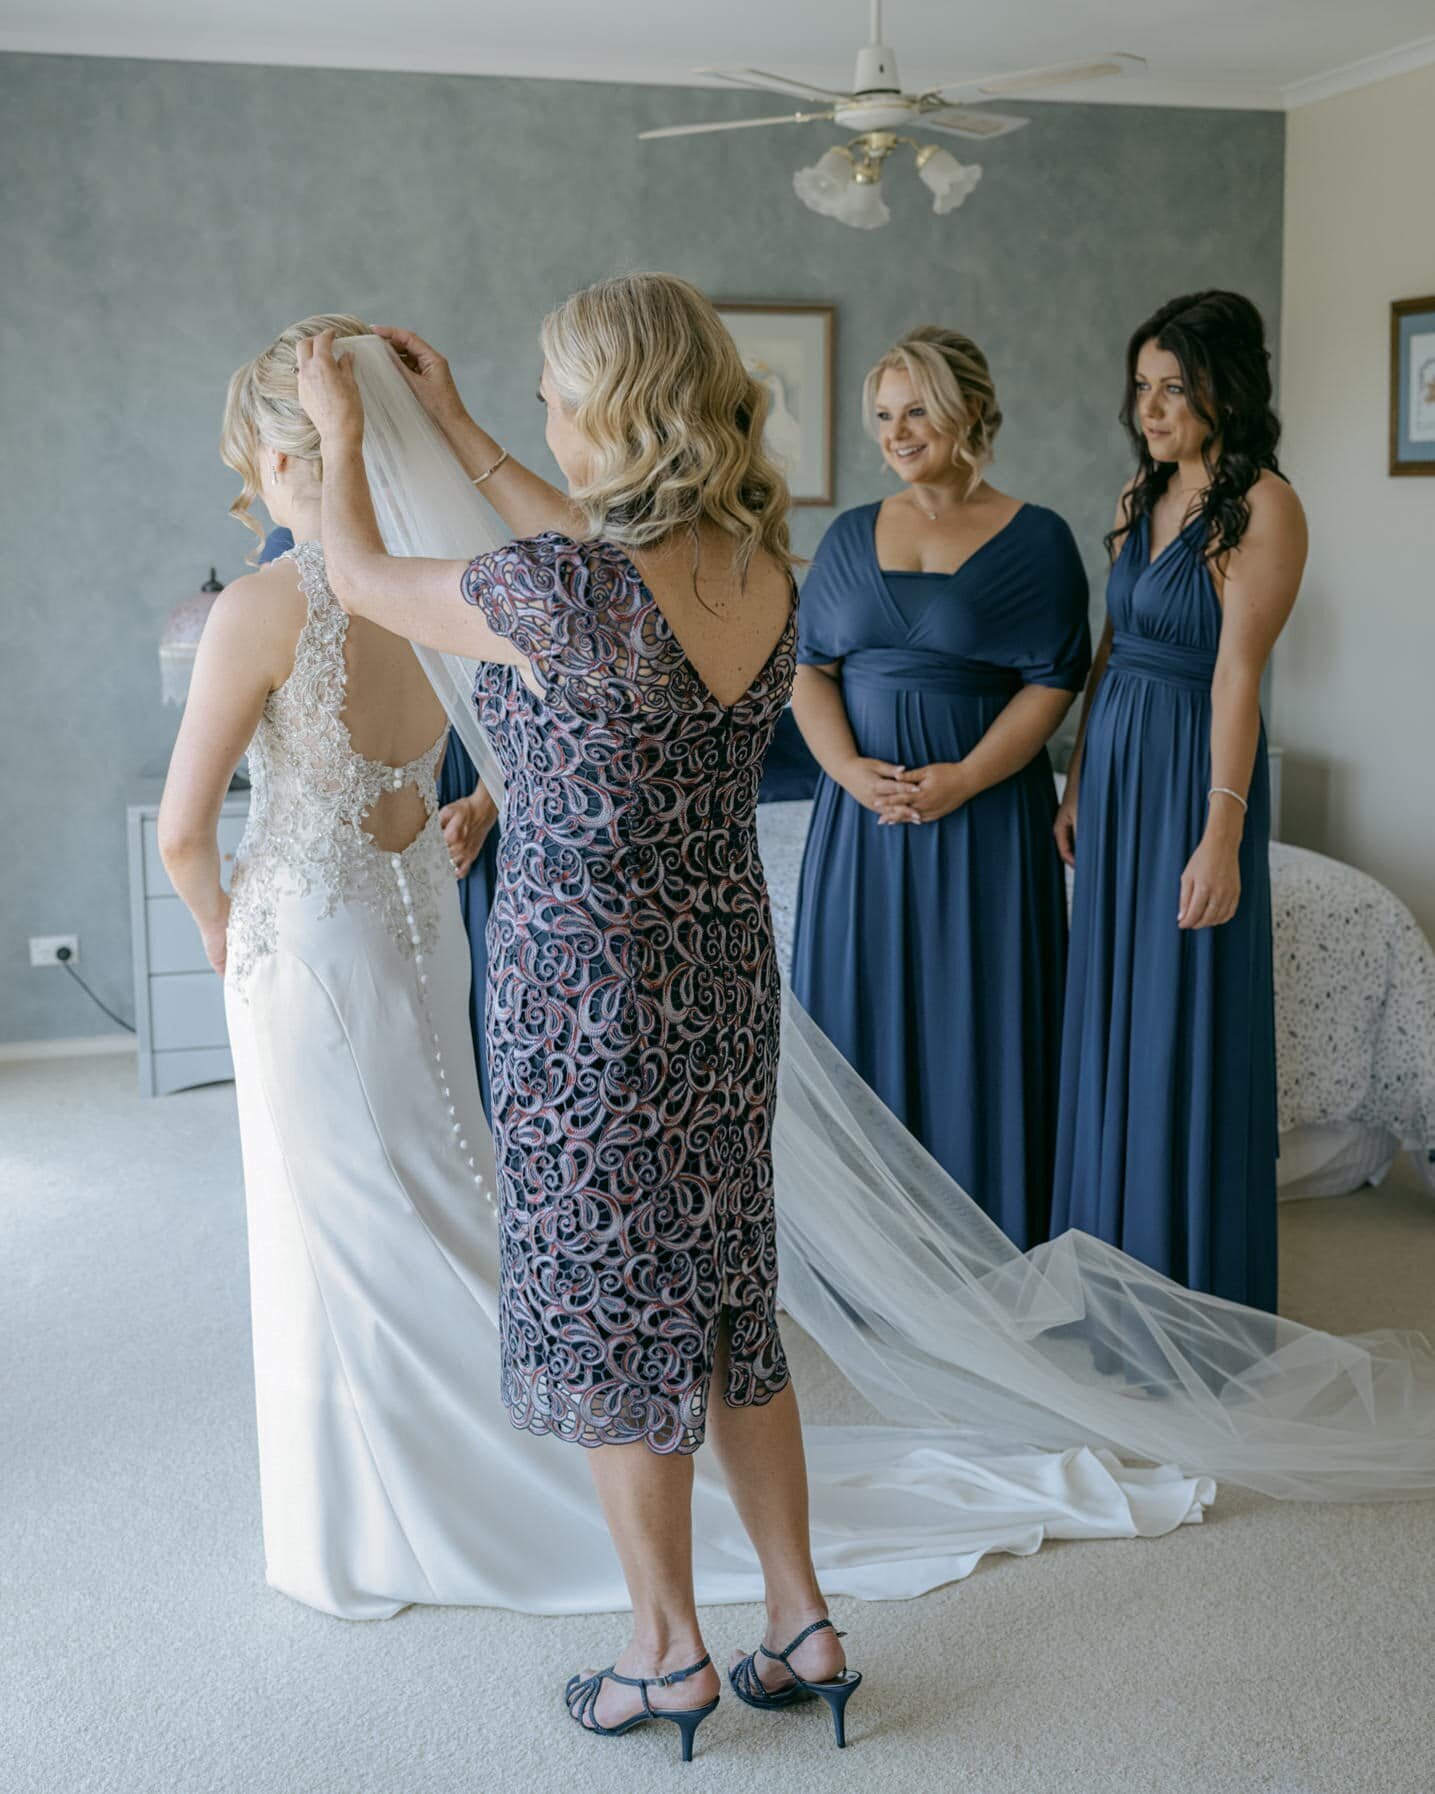 Stones of the Yarra Valley wedding - Serenity Photography 35